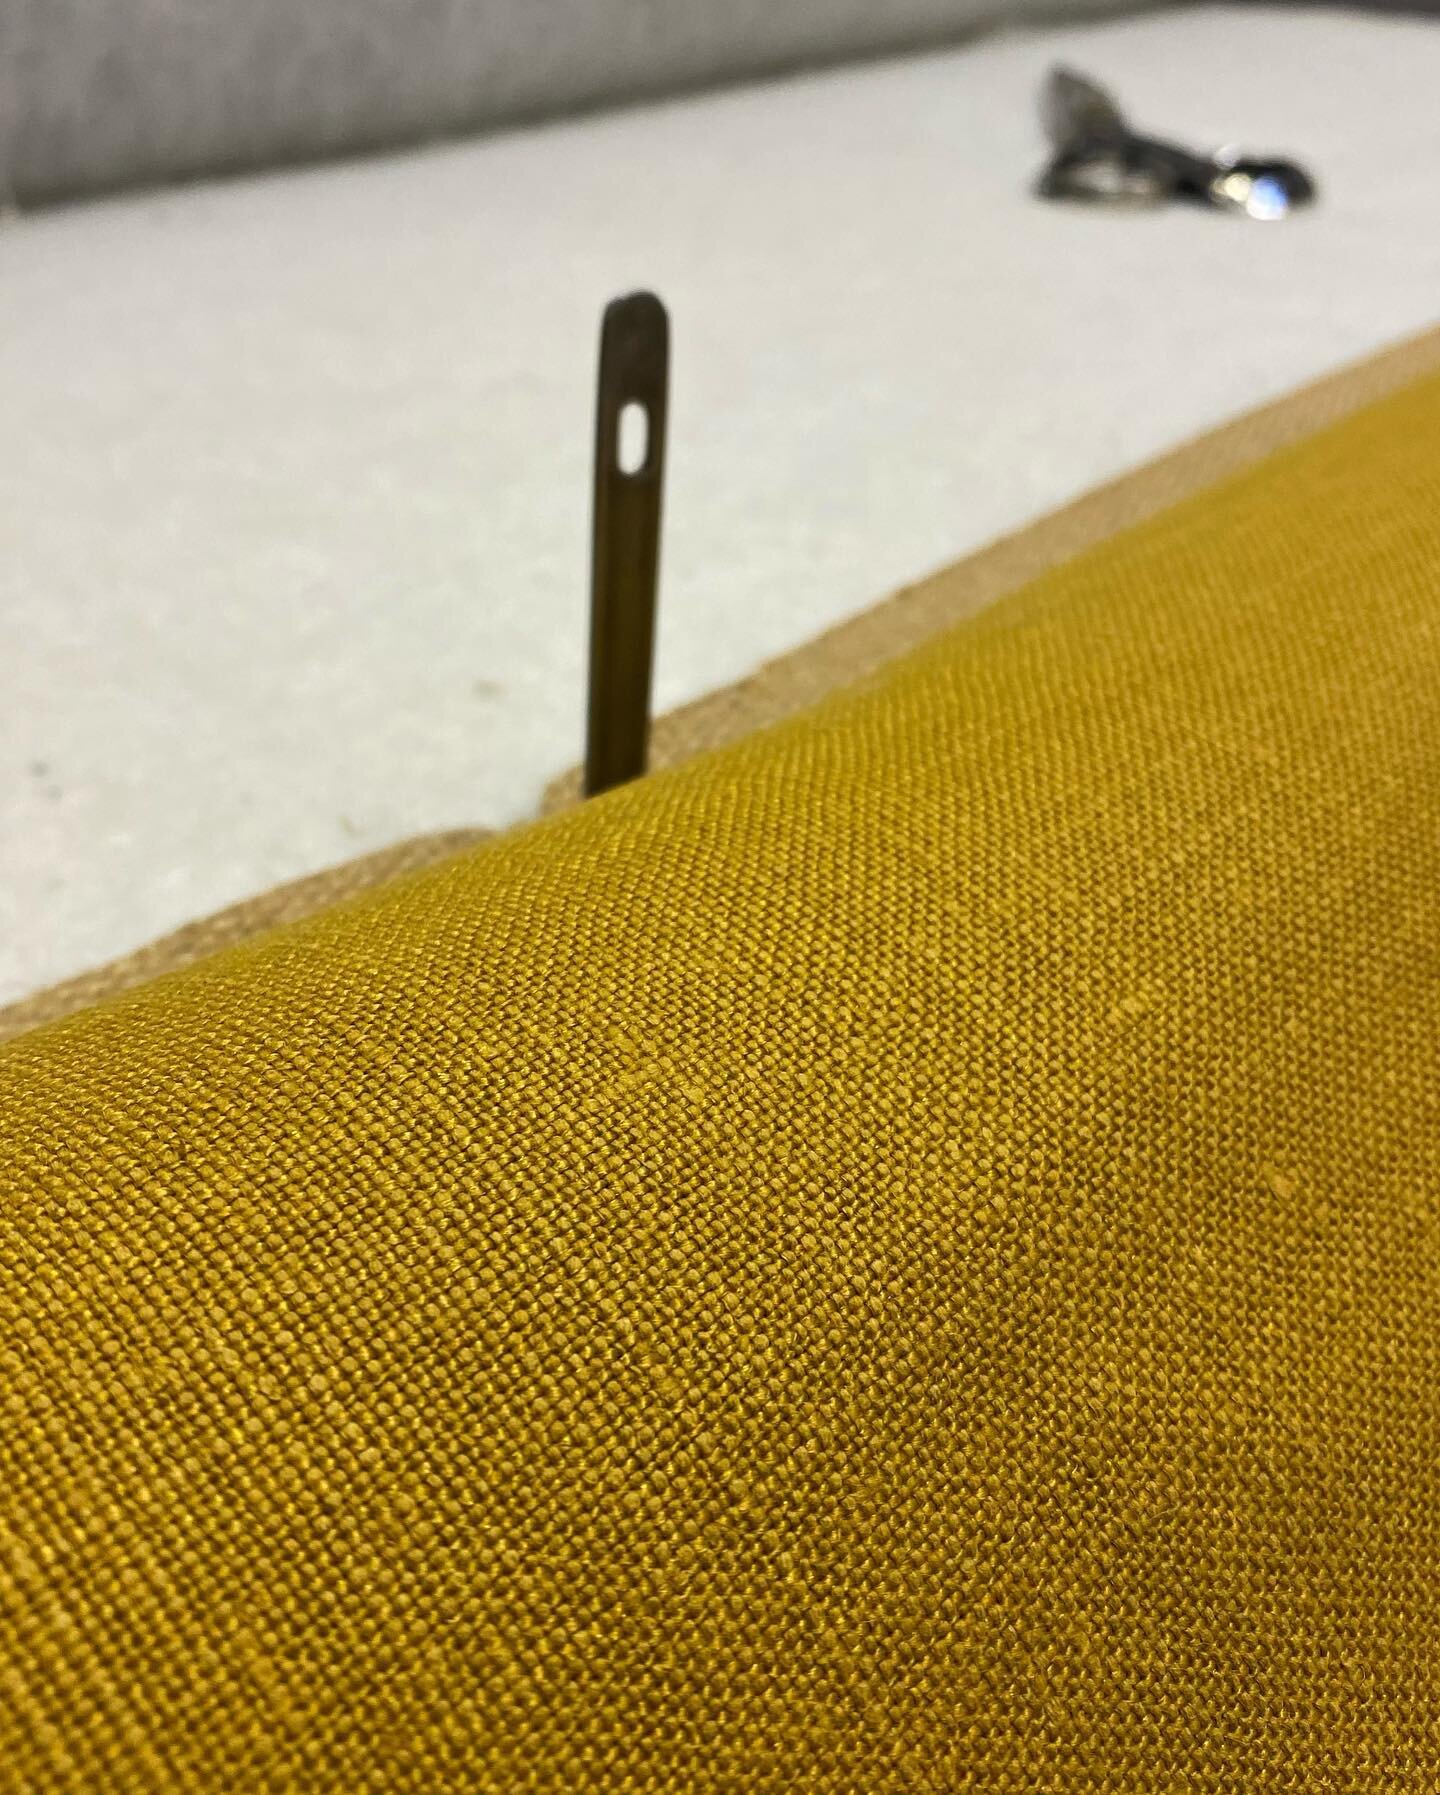 Work is well underway on our new Ross sofa which will be revealed next week. The sofa is a faithful and accurate reproduction of an original English Regency period piece. 

The model will feature a comfortable feather and down seat cushion with expos